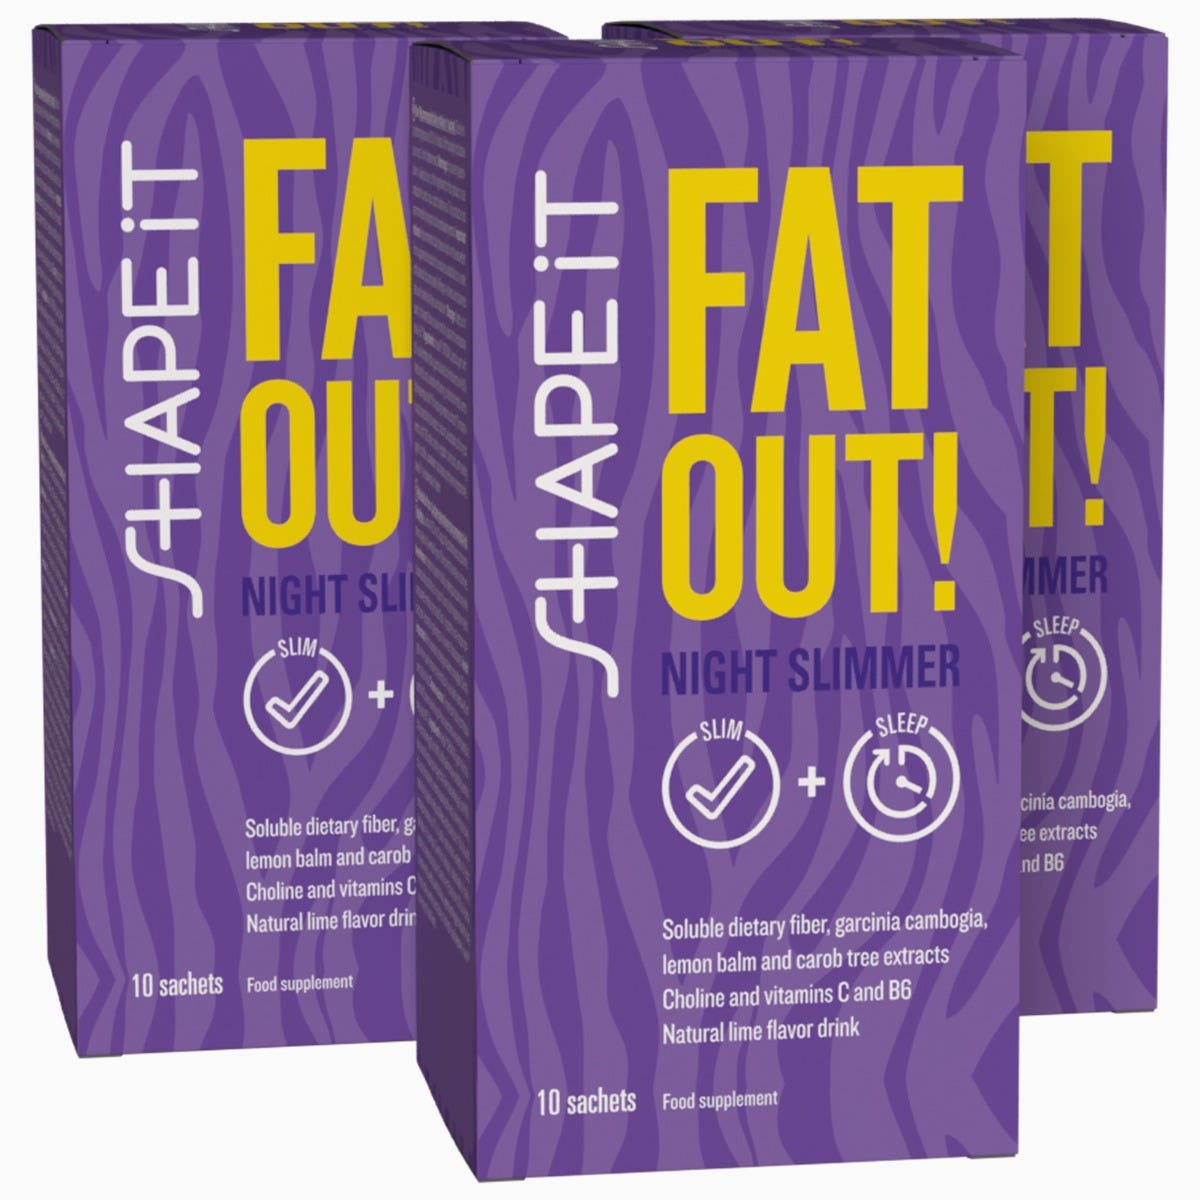 SHAPEiT Fat Out!